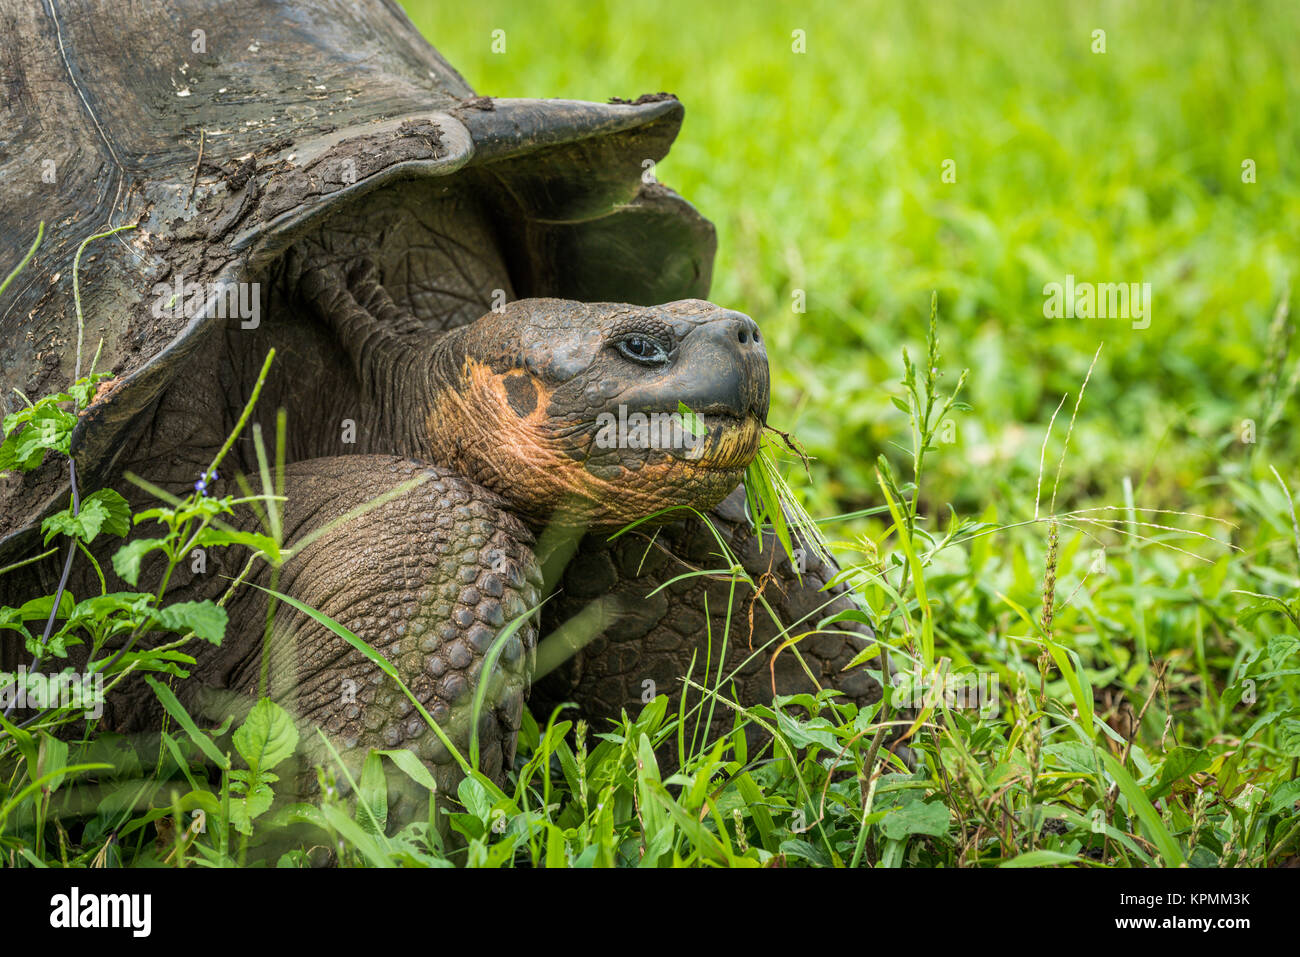 Close-up of Galapagos giant tortoise chewing grass Stock Photo